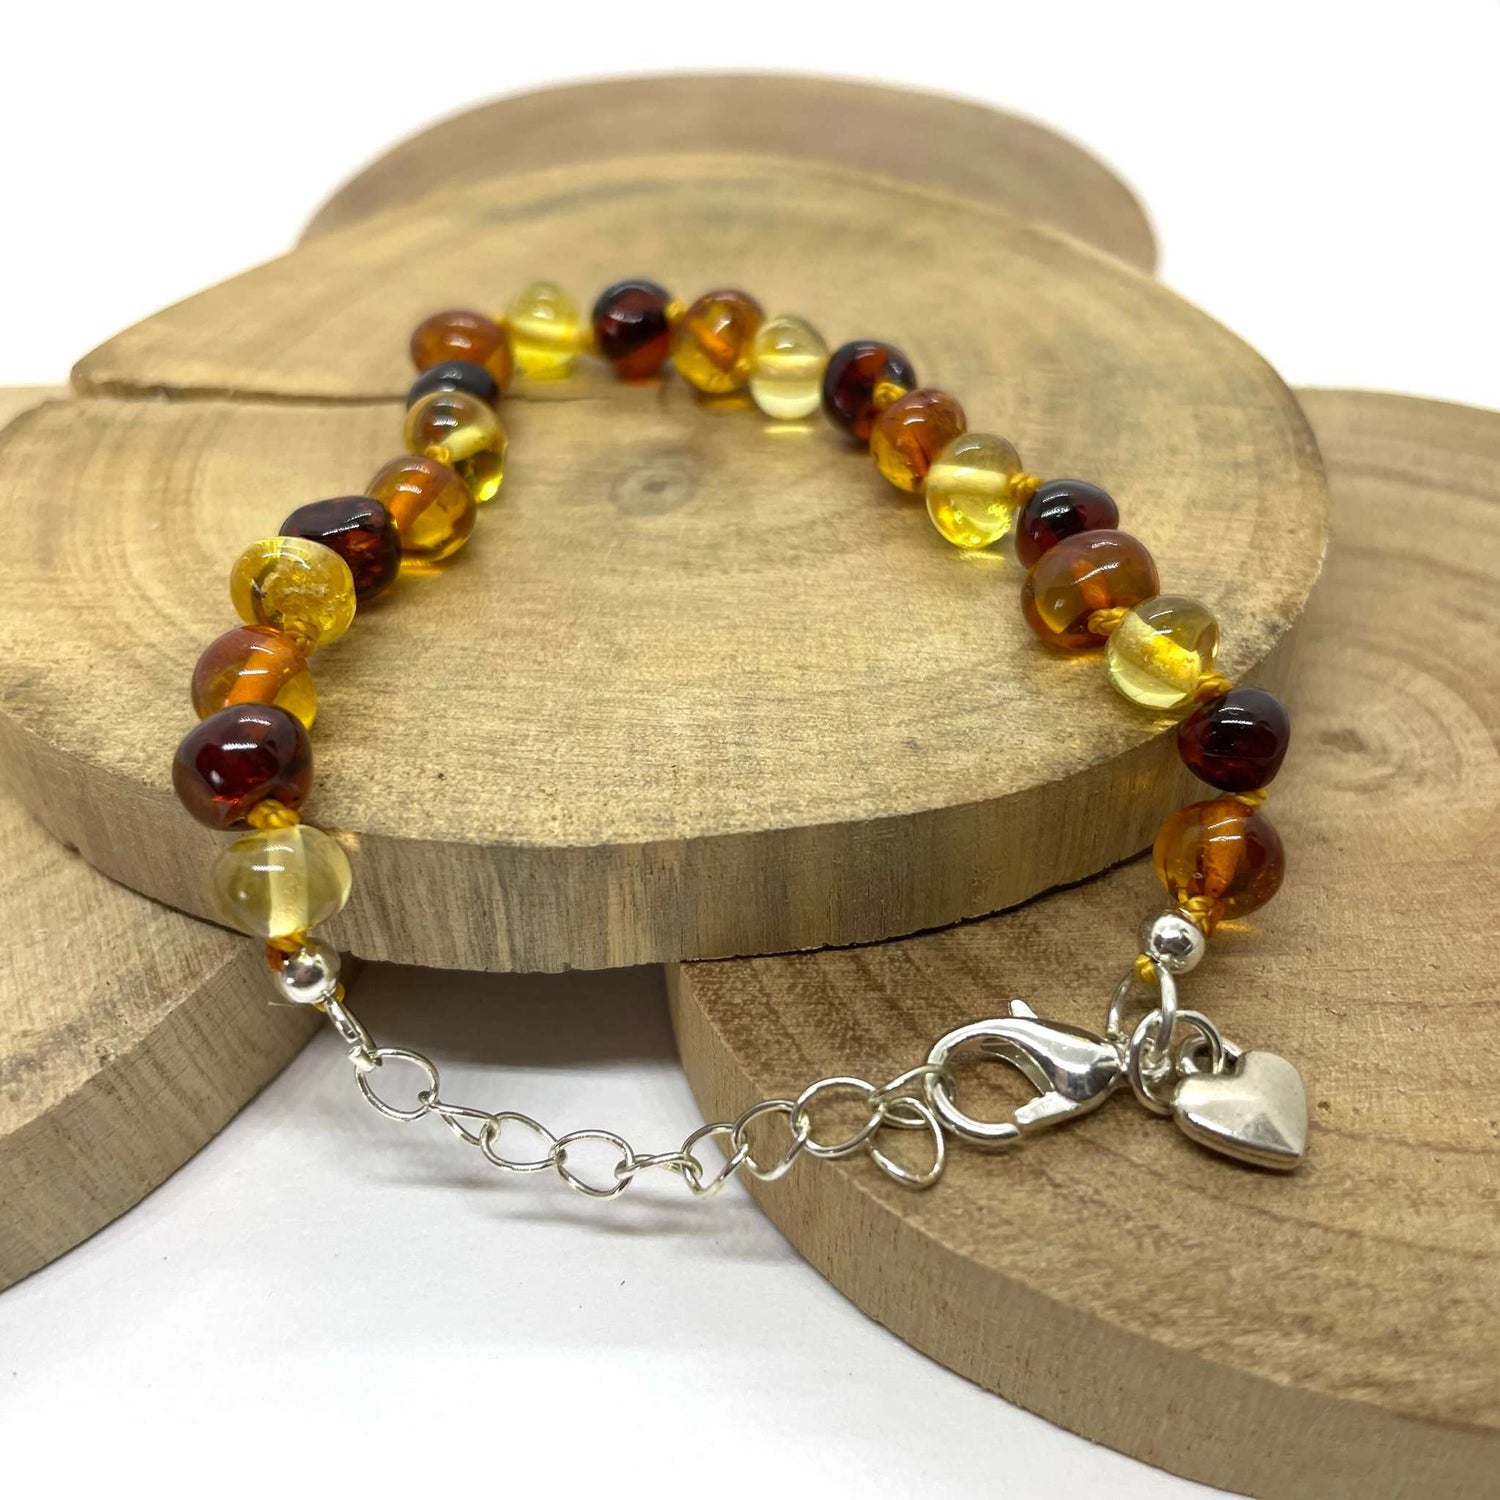 Raw unpolished baby necklaces - Amber jewelry store from Baltic region |  Bracelets, necklaces, earrings, pendants, beads